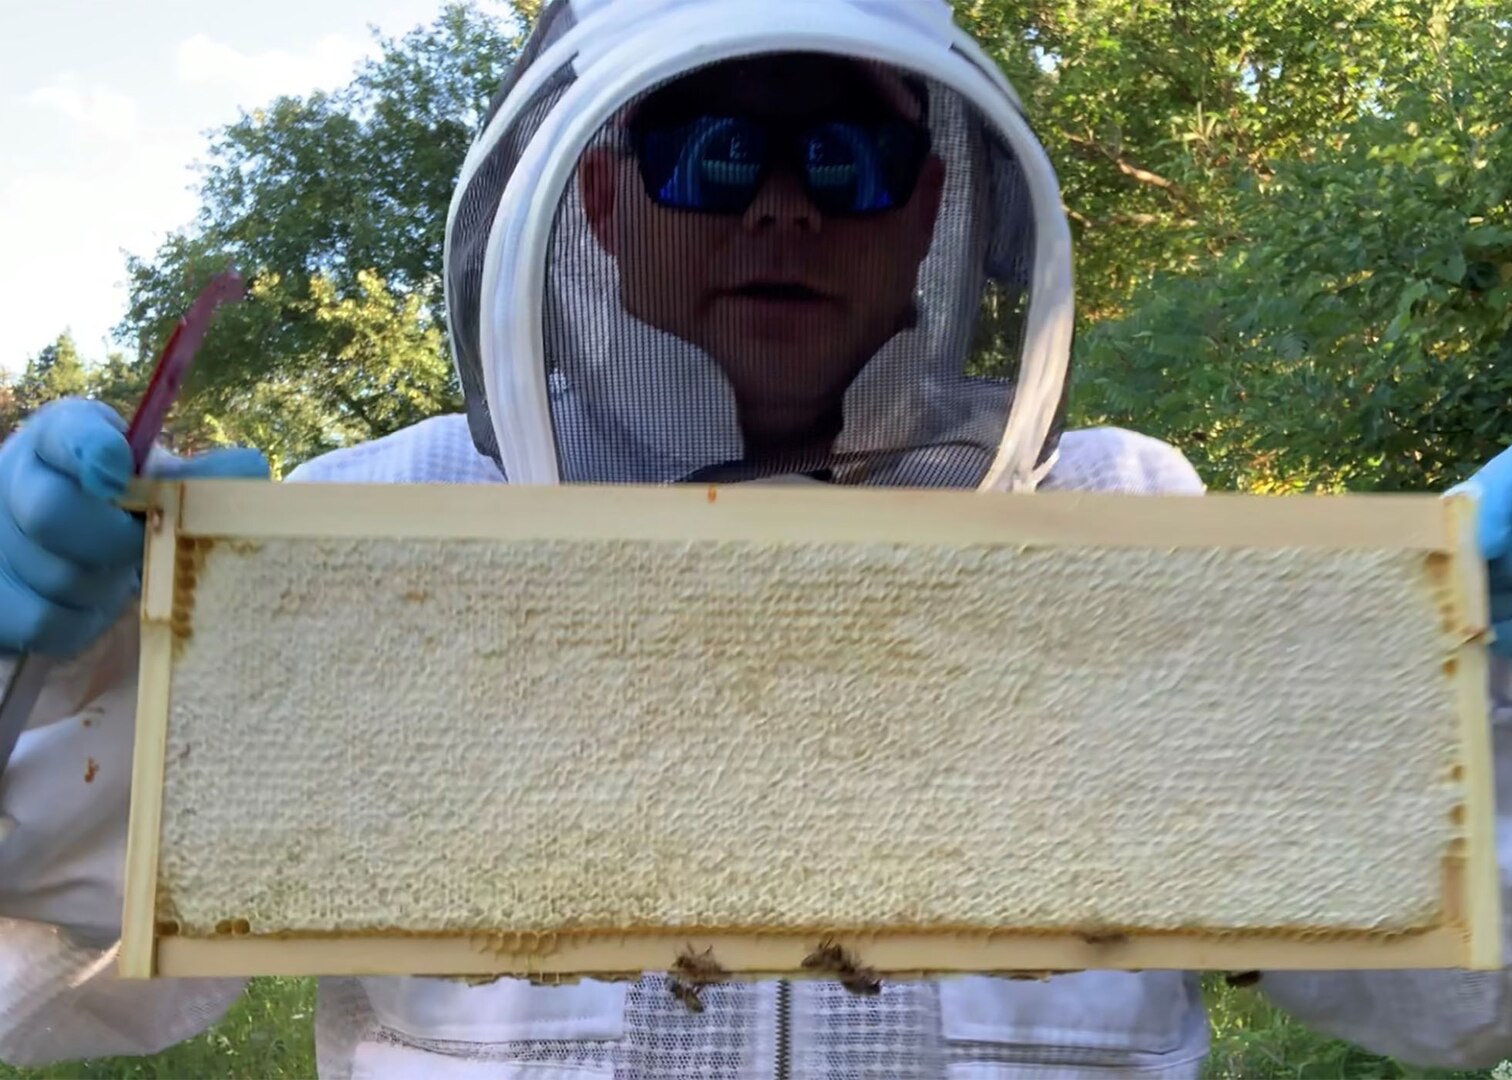 Defense Logistics Agency employee and beekeeper Adam Beam takes a closer look at one of the frames from one of his hives.